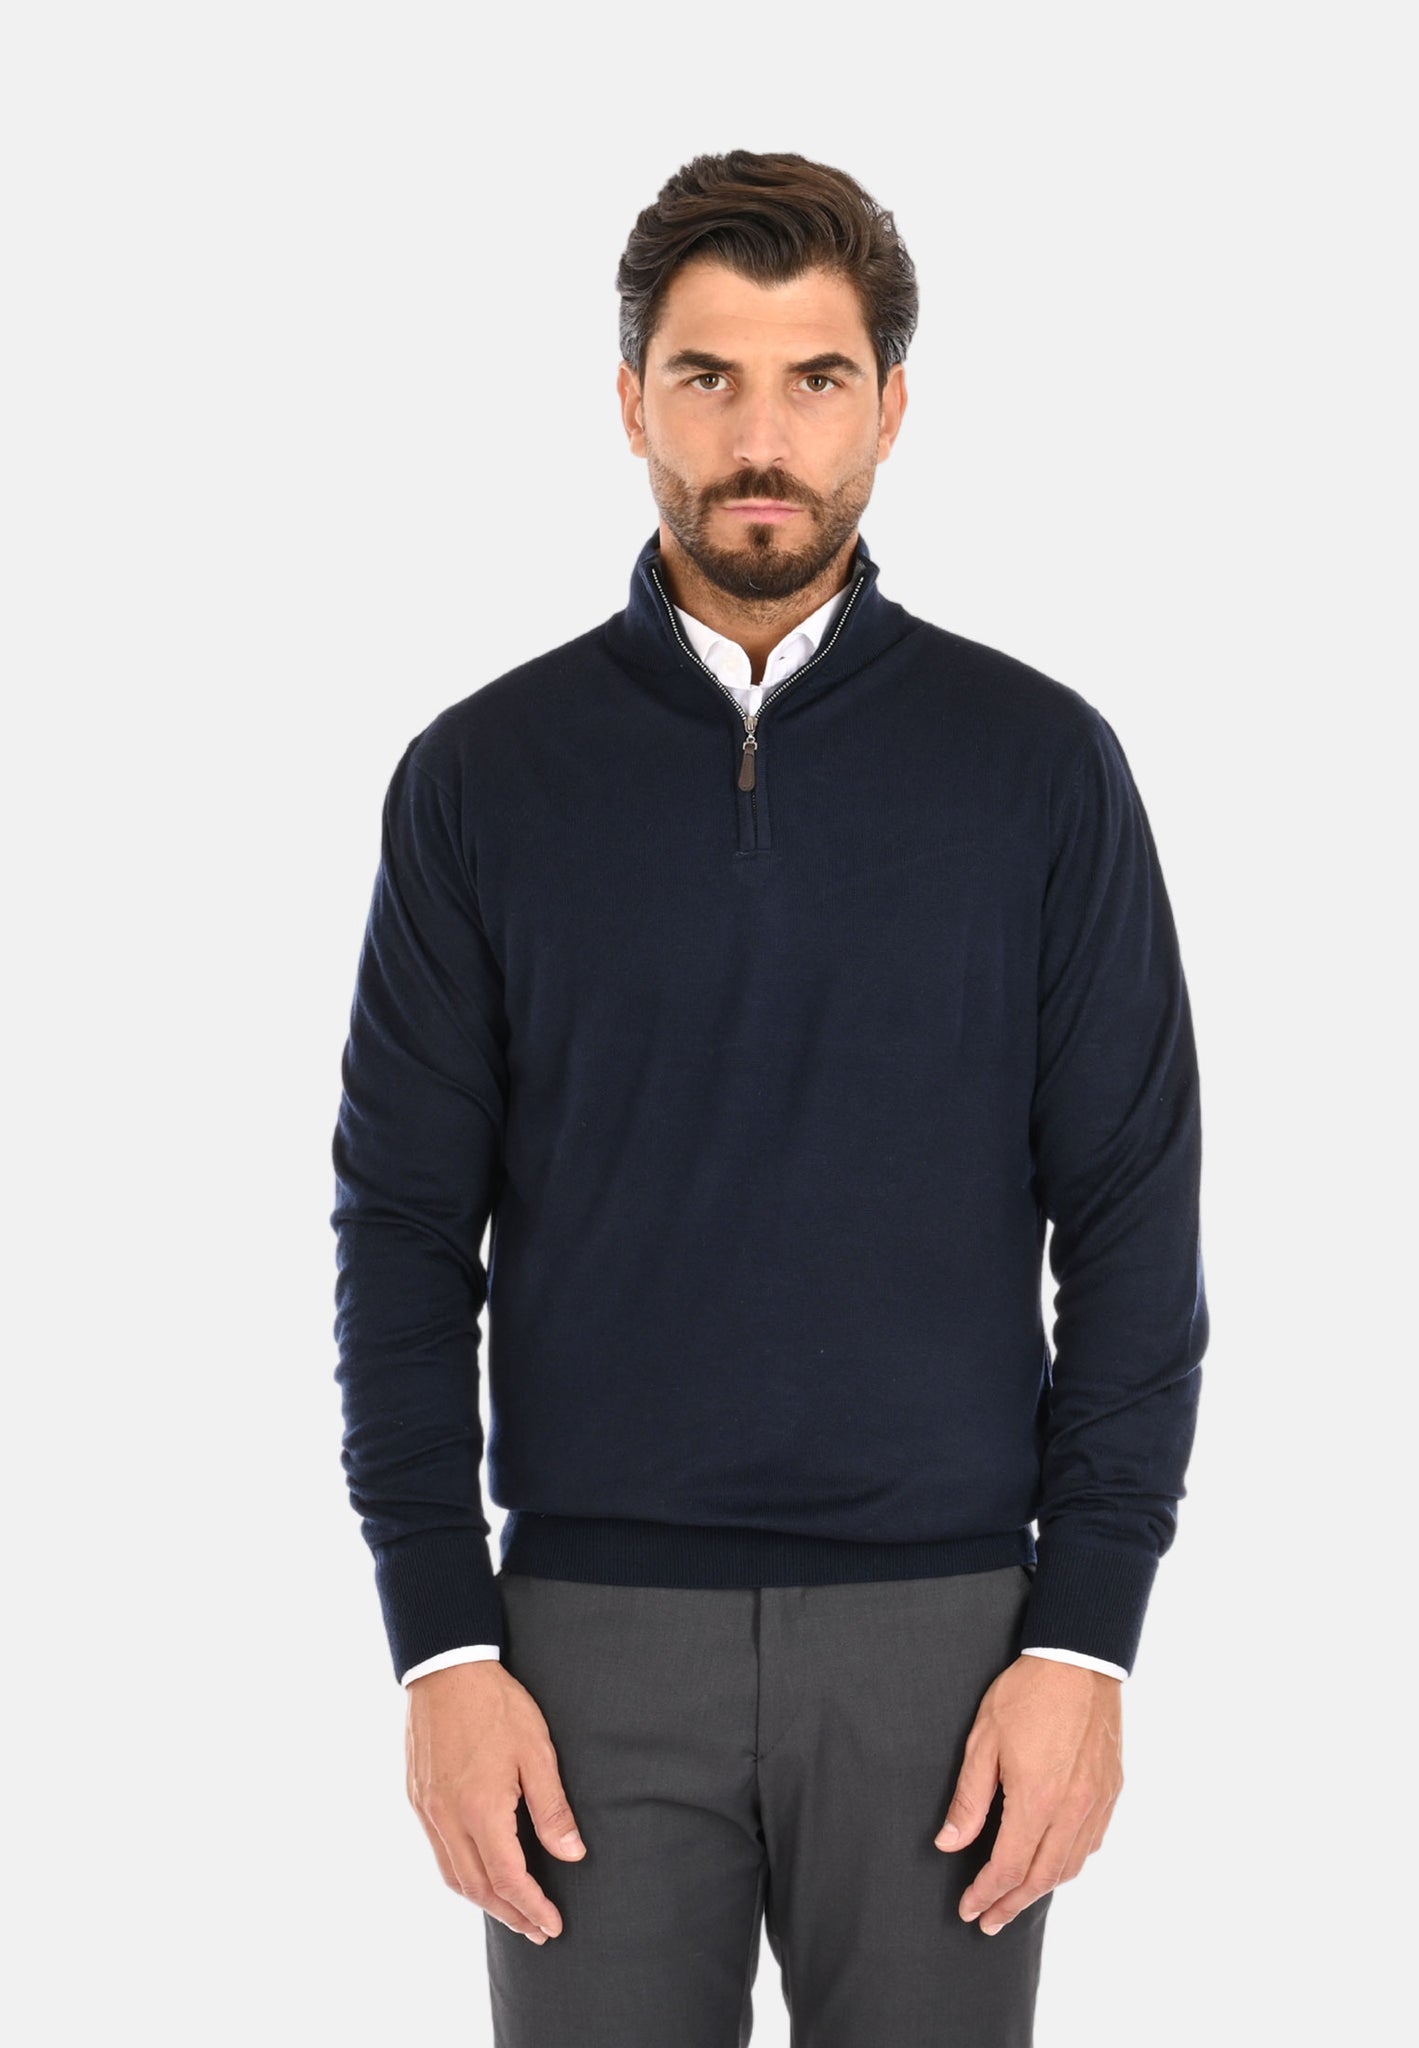 Men's wool and cashmere sweater with half zip